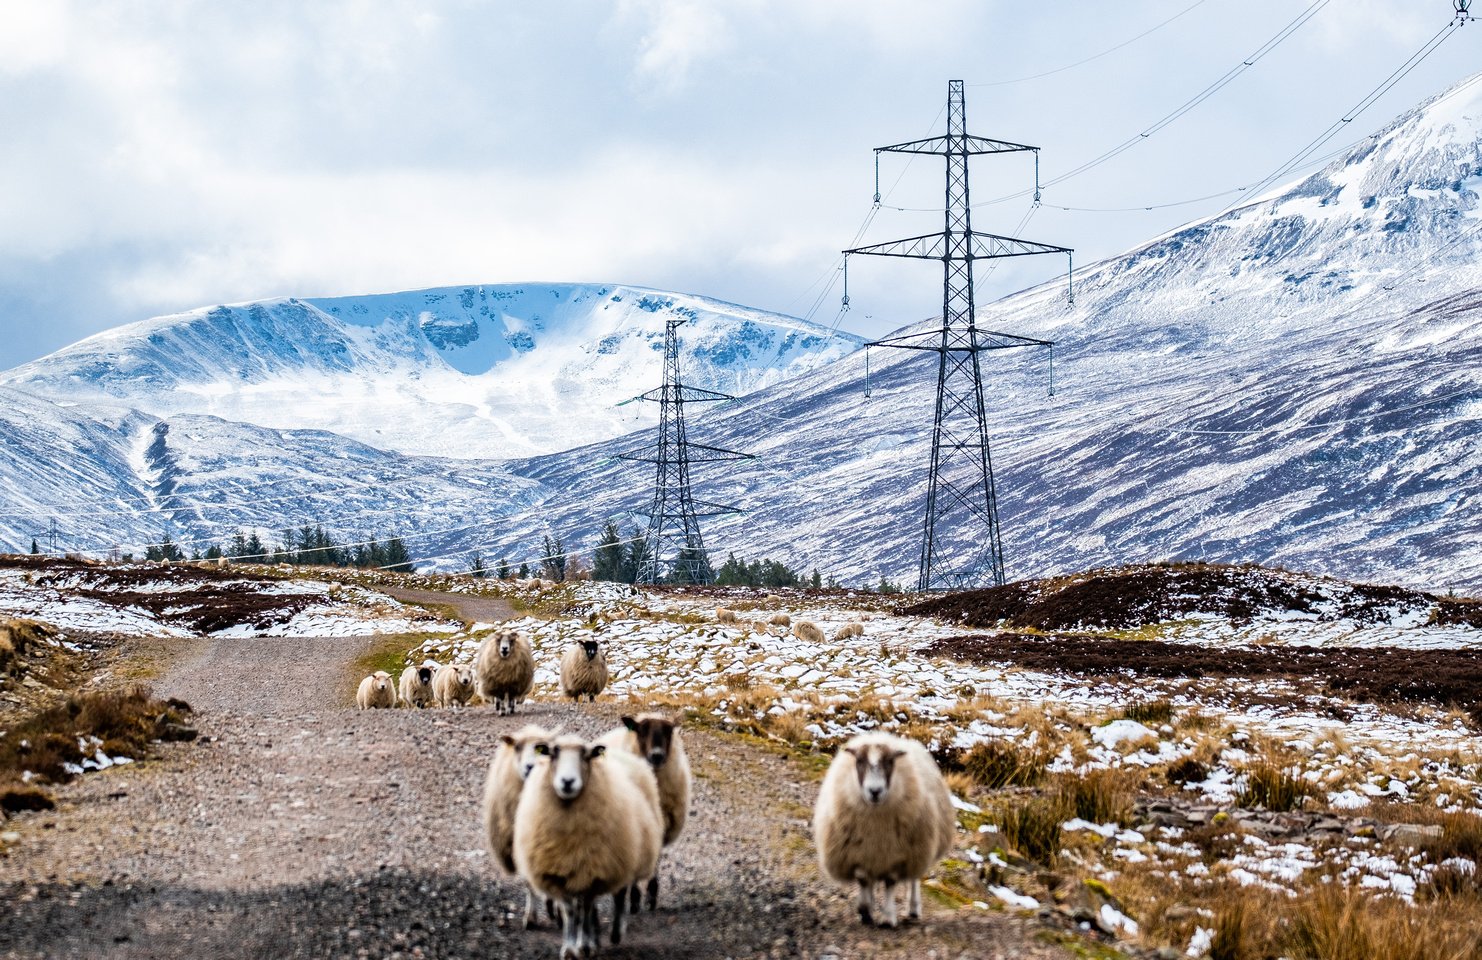 A flock of sheep standing in front of a snowy Scottish landscape